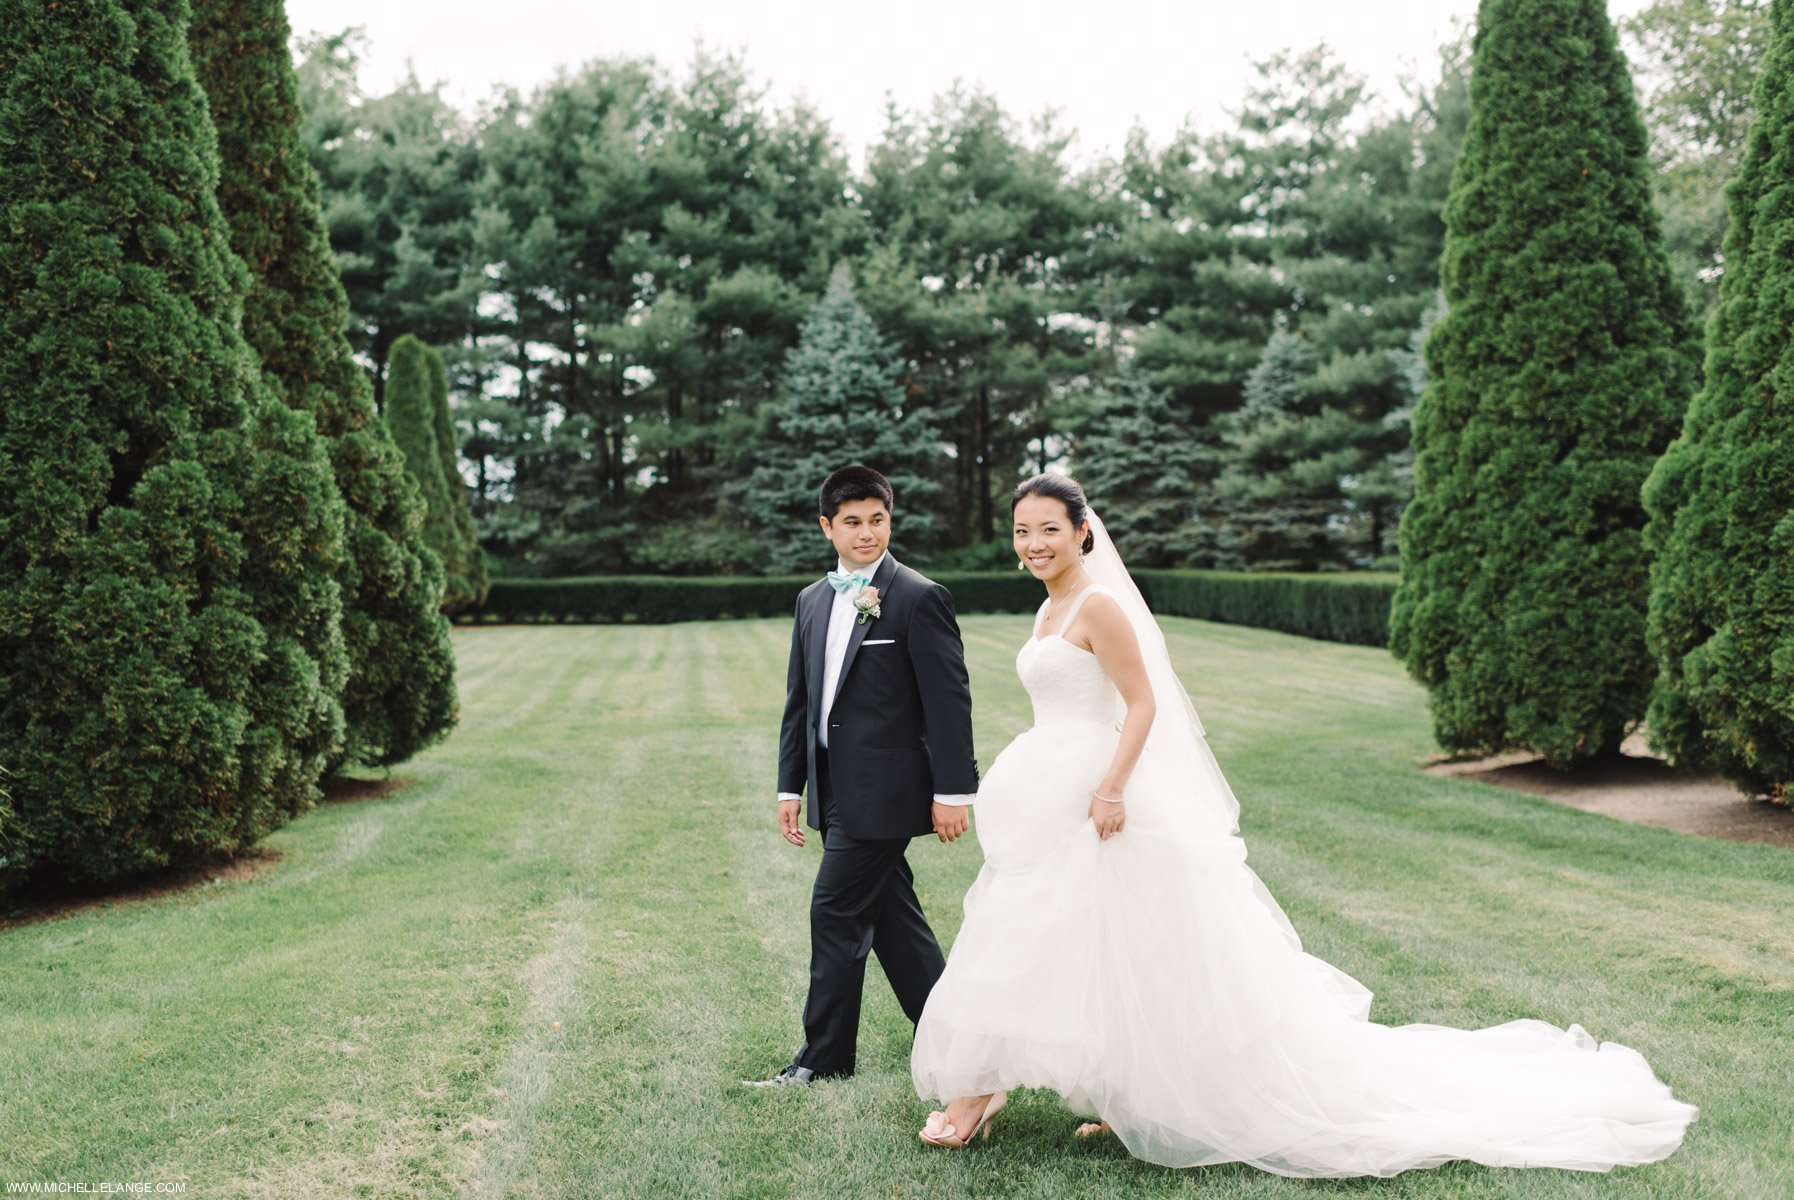 Bride and Groom in the Garden at The Carltun in New York Wedding Photographer